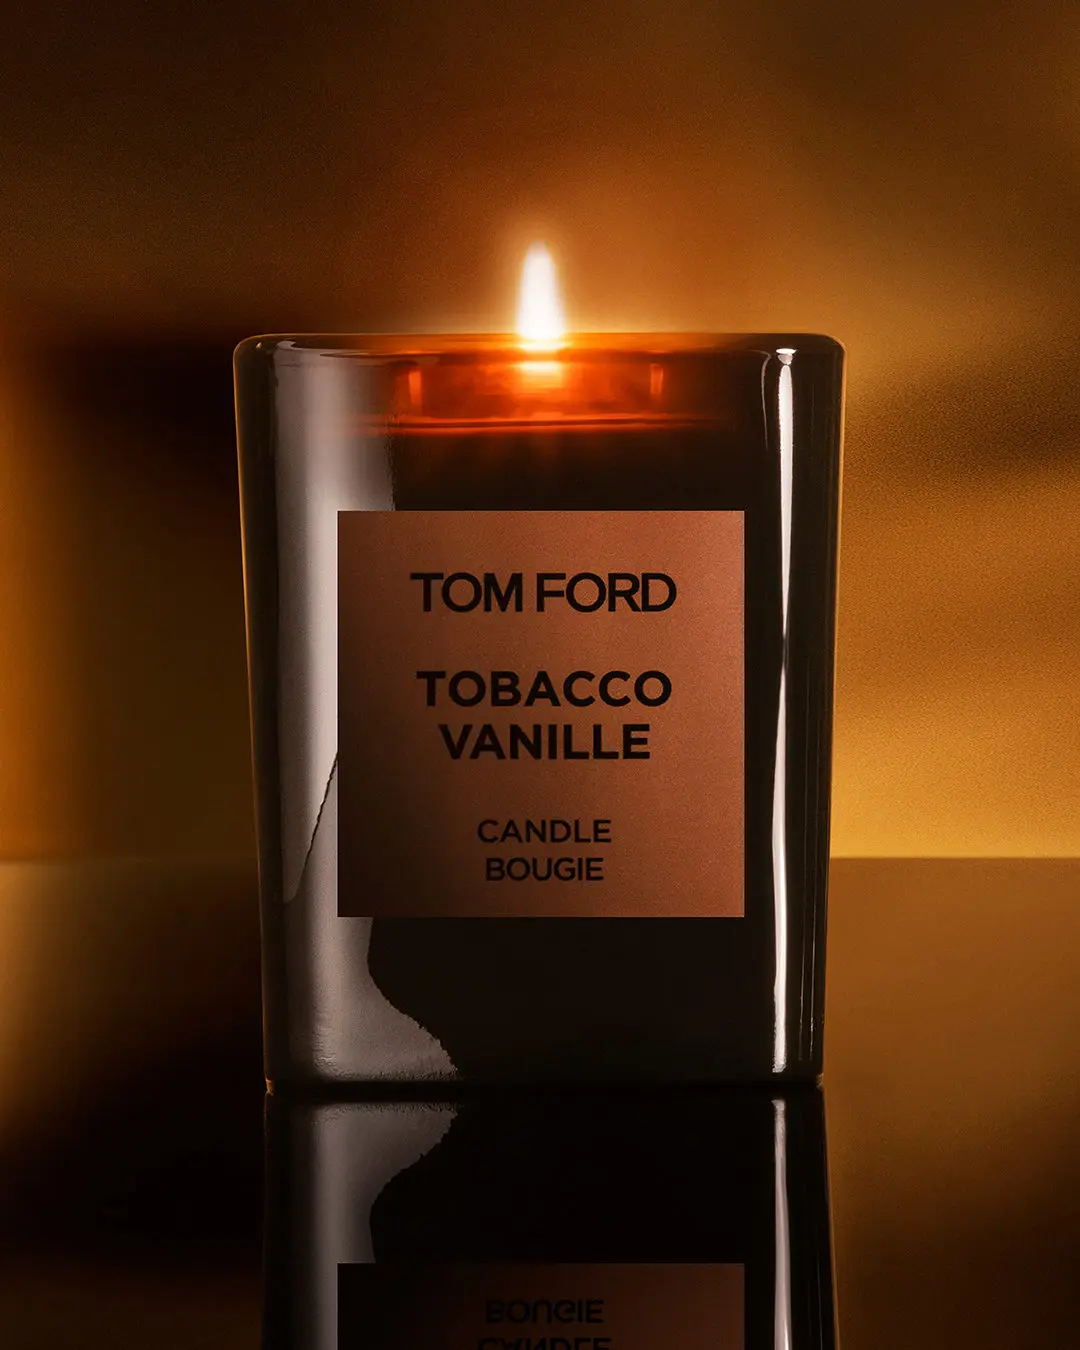 PRIVATE BLEND TOBACCO VANILLE CANDLE - TOM FORD